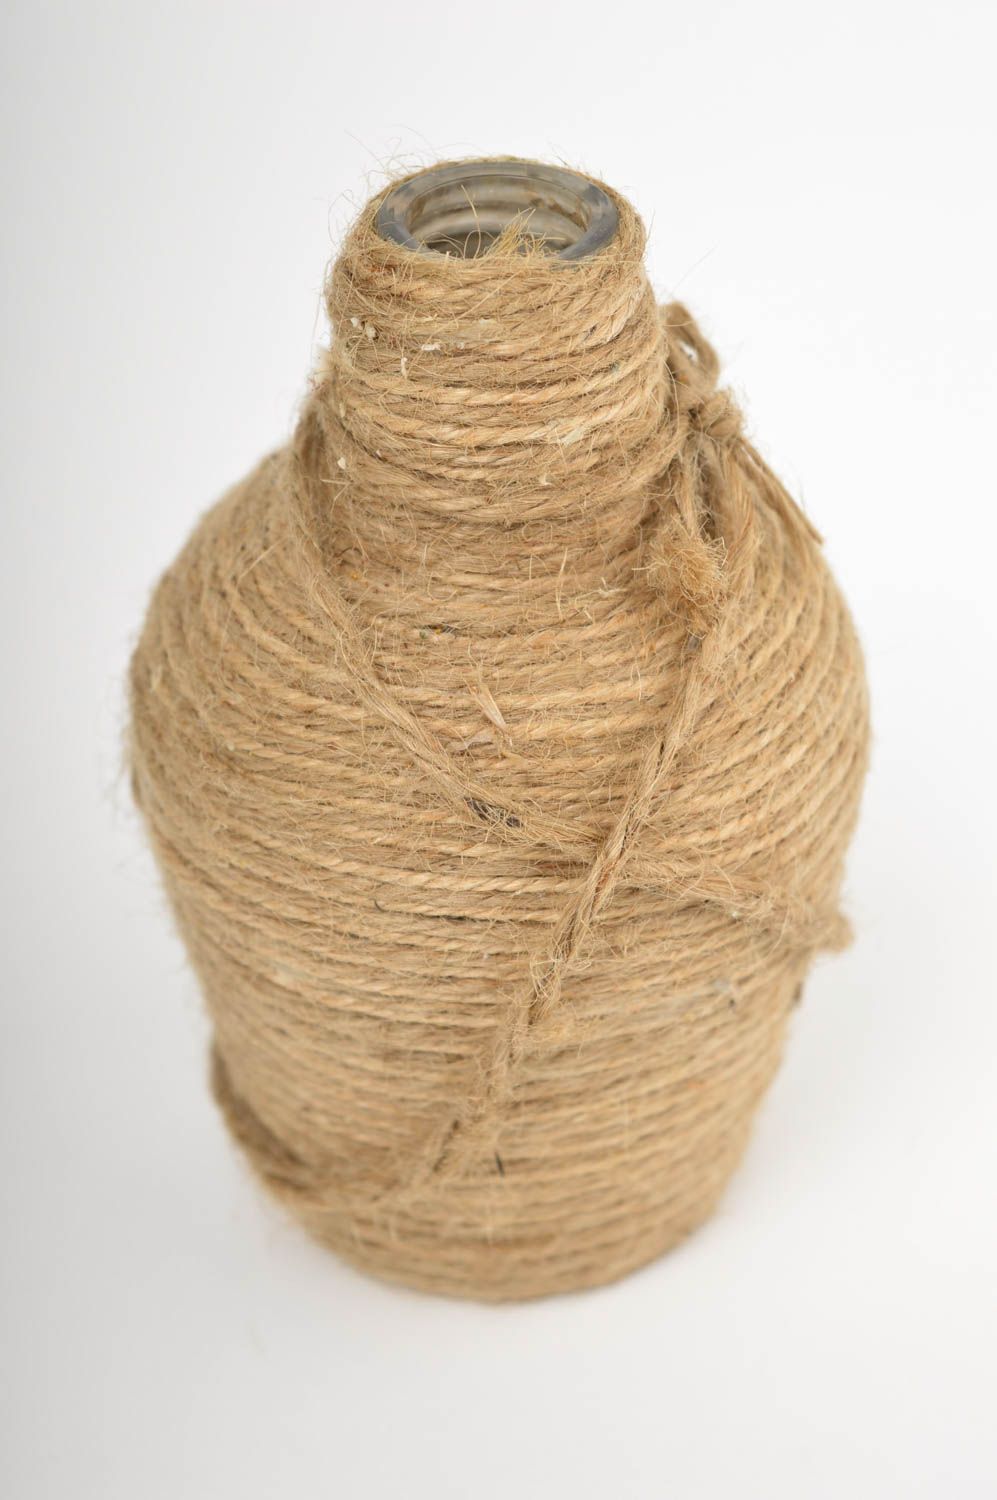 5 inches glass bottle decorated with twine 0,55 lb photo 2